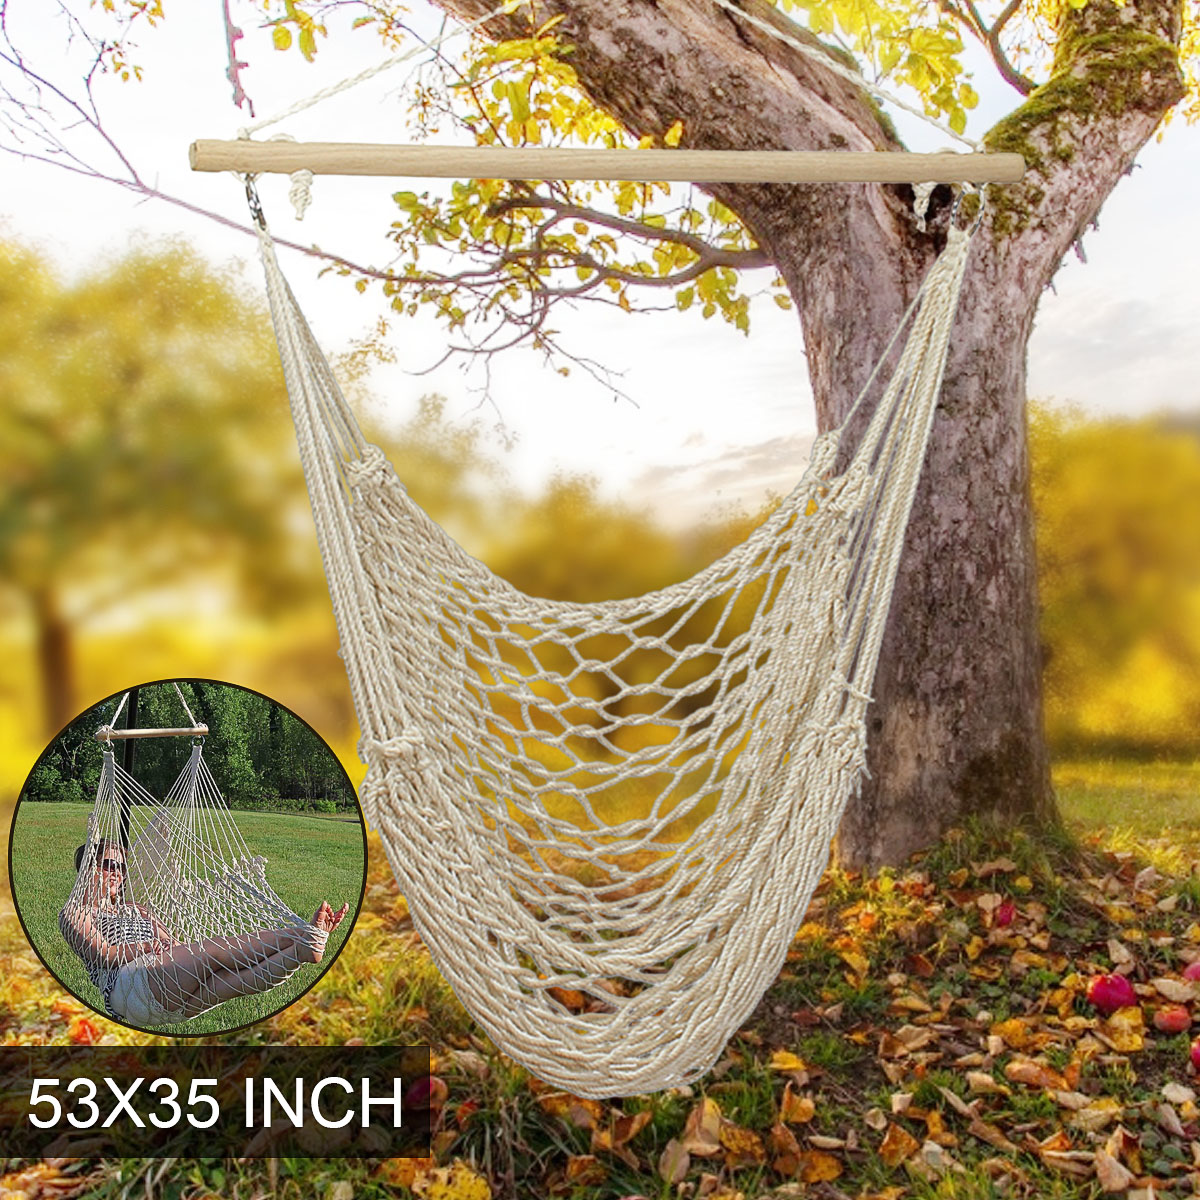 135-x-90CM-Portable-Outdoor-Swing-Cotton-Hammock-Chair-Wooden-Bar-Hanging-Rope-Chair-For-Garden-Pati-1304667-3